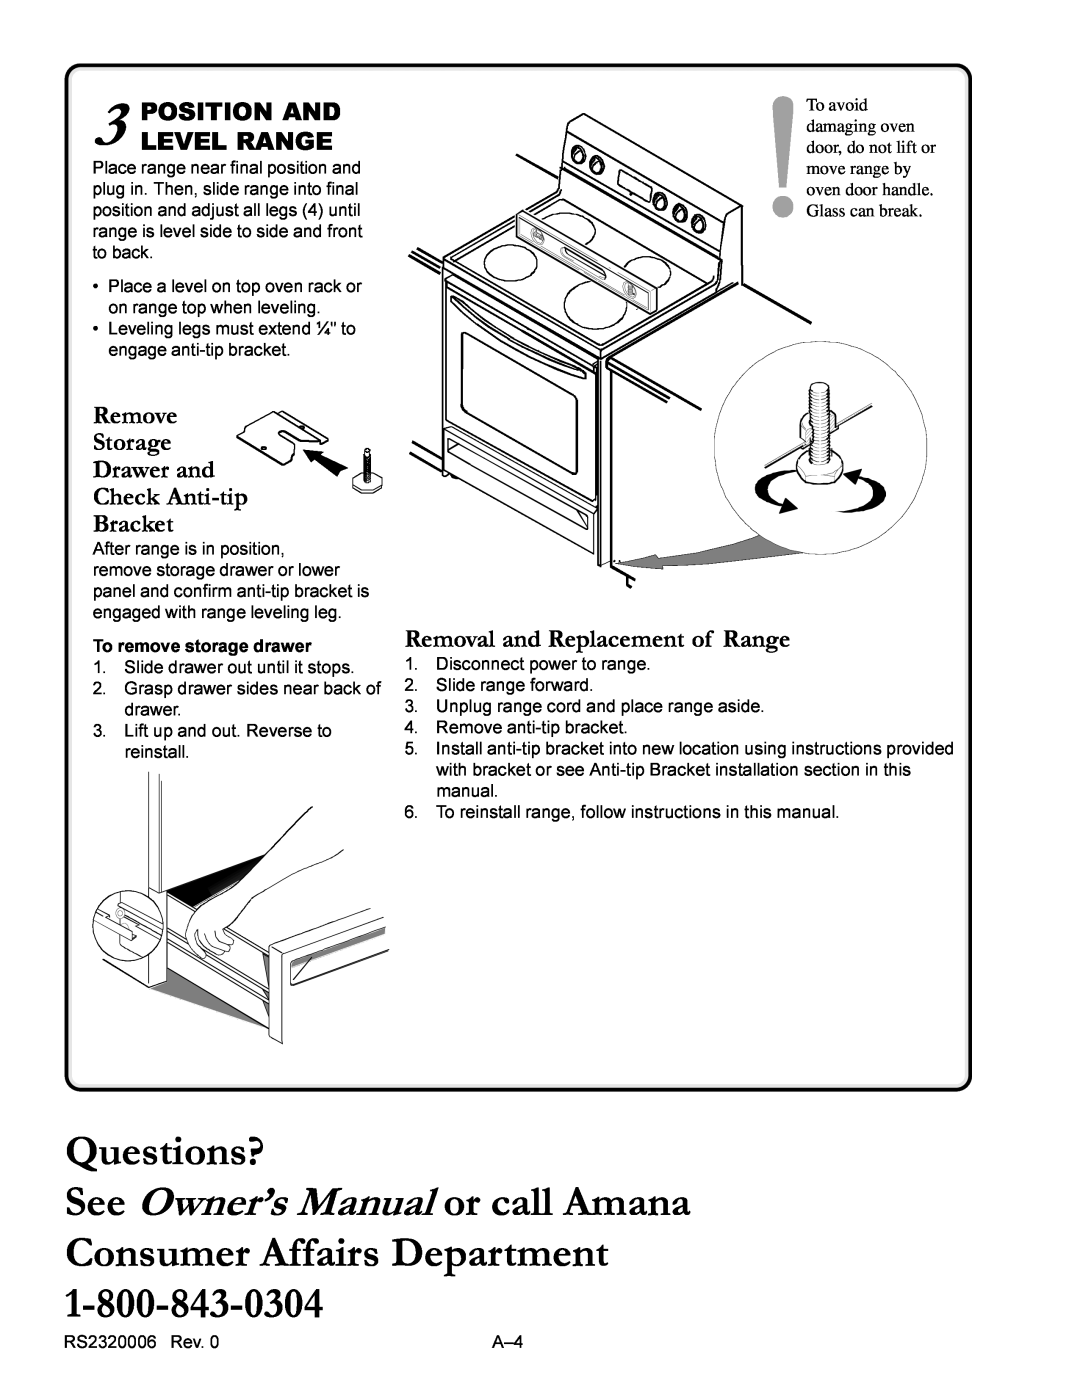 Amana RS2320006 service manual Questions?, Position And Level Range, Remove Storage Drawer and Check Anti-tip Bracket 